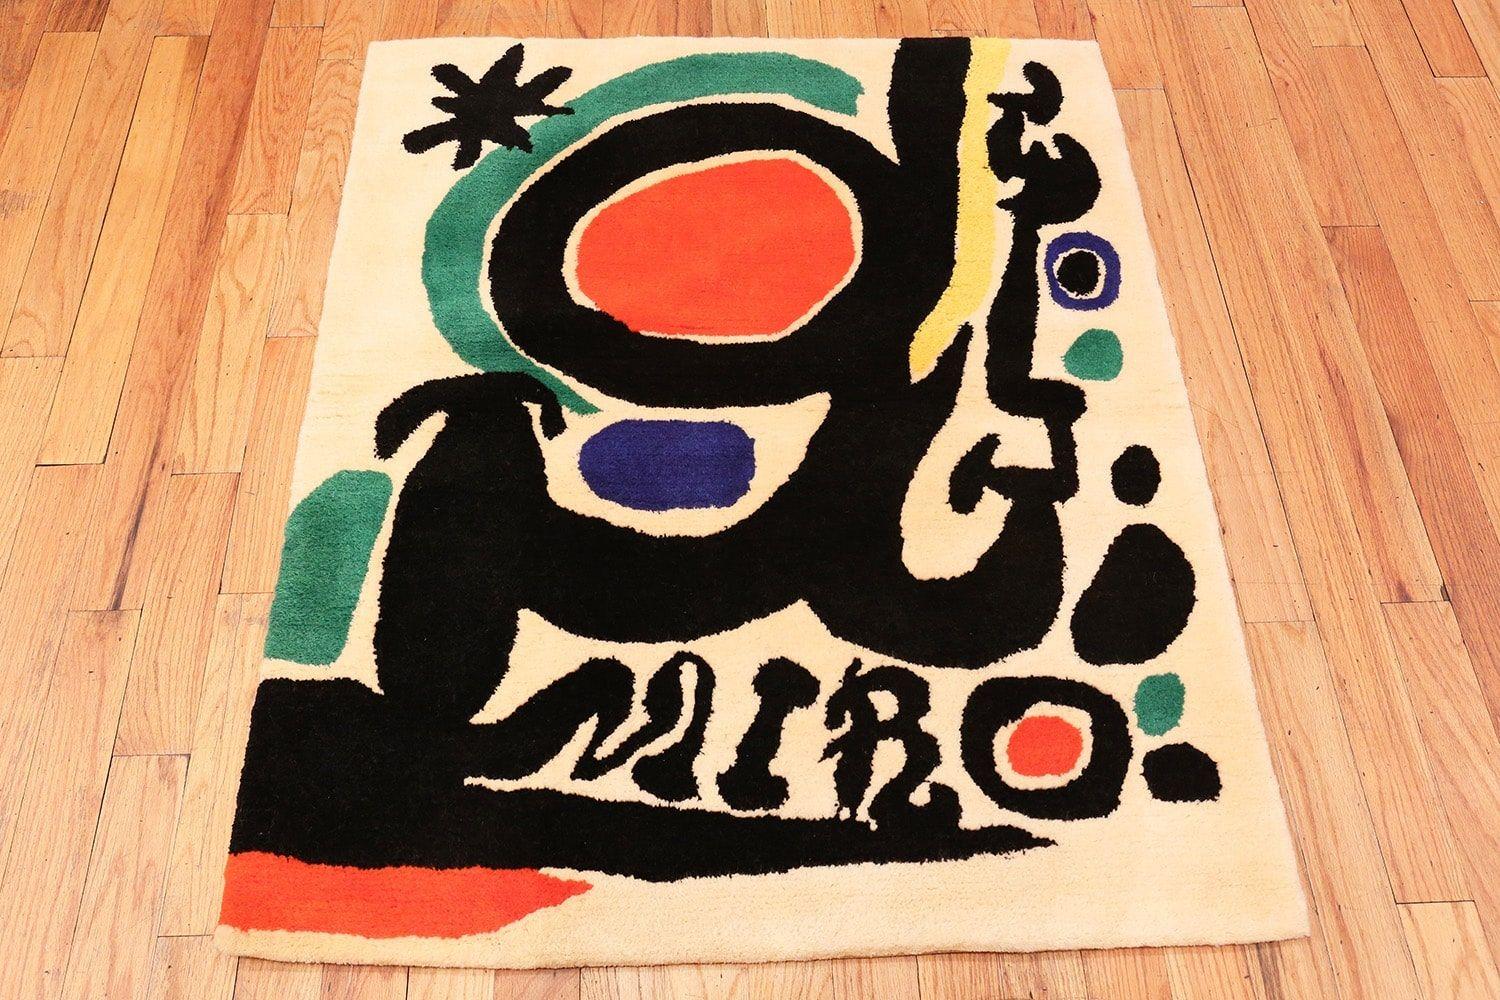 Beautifully artistic small square size vintage Miro design art rug, country of origin or rug type: Vintage Scandinavian rug, date: circa mid-20th century. Size: 3 ft 6 in x 4 ft 3 in (1.07 m x 1.3 m)

This small vintage Scandinavian rug by the